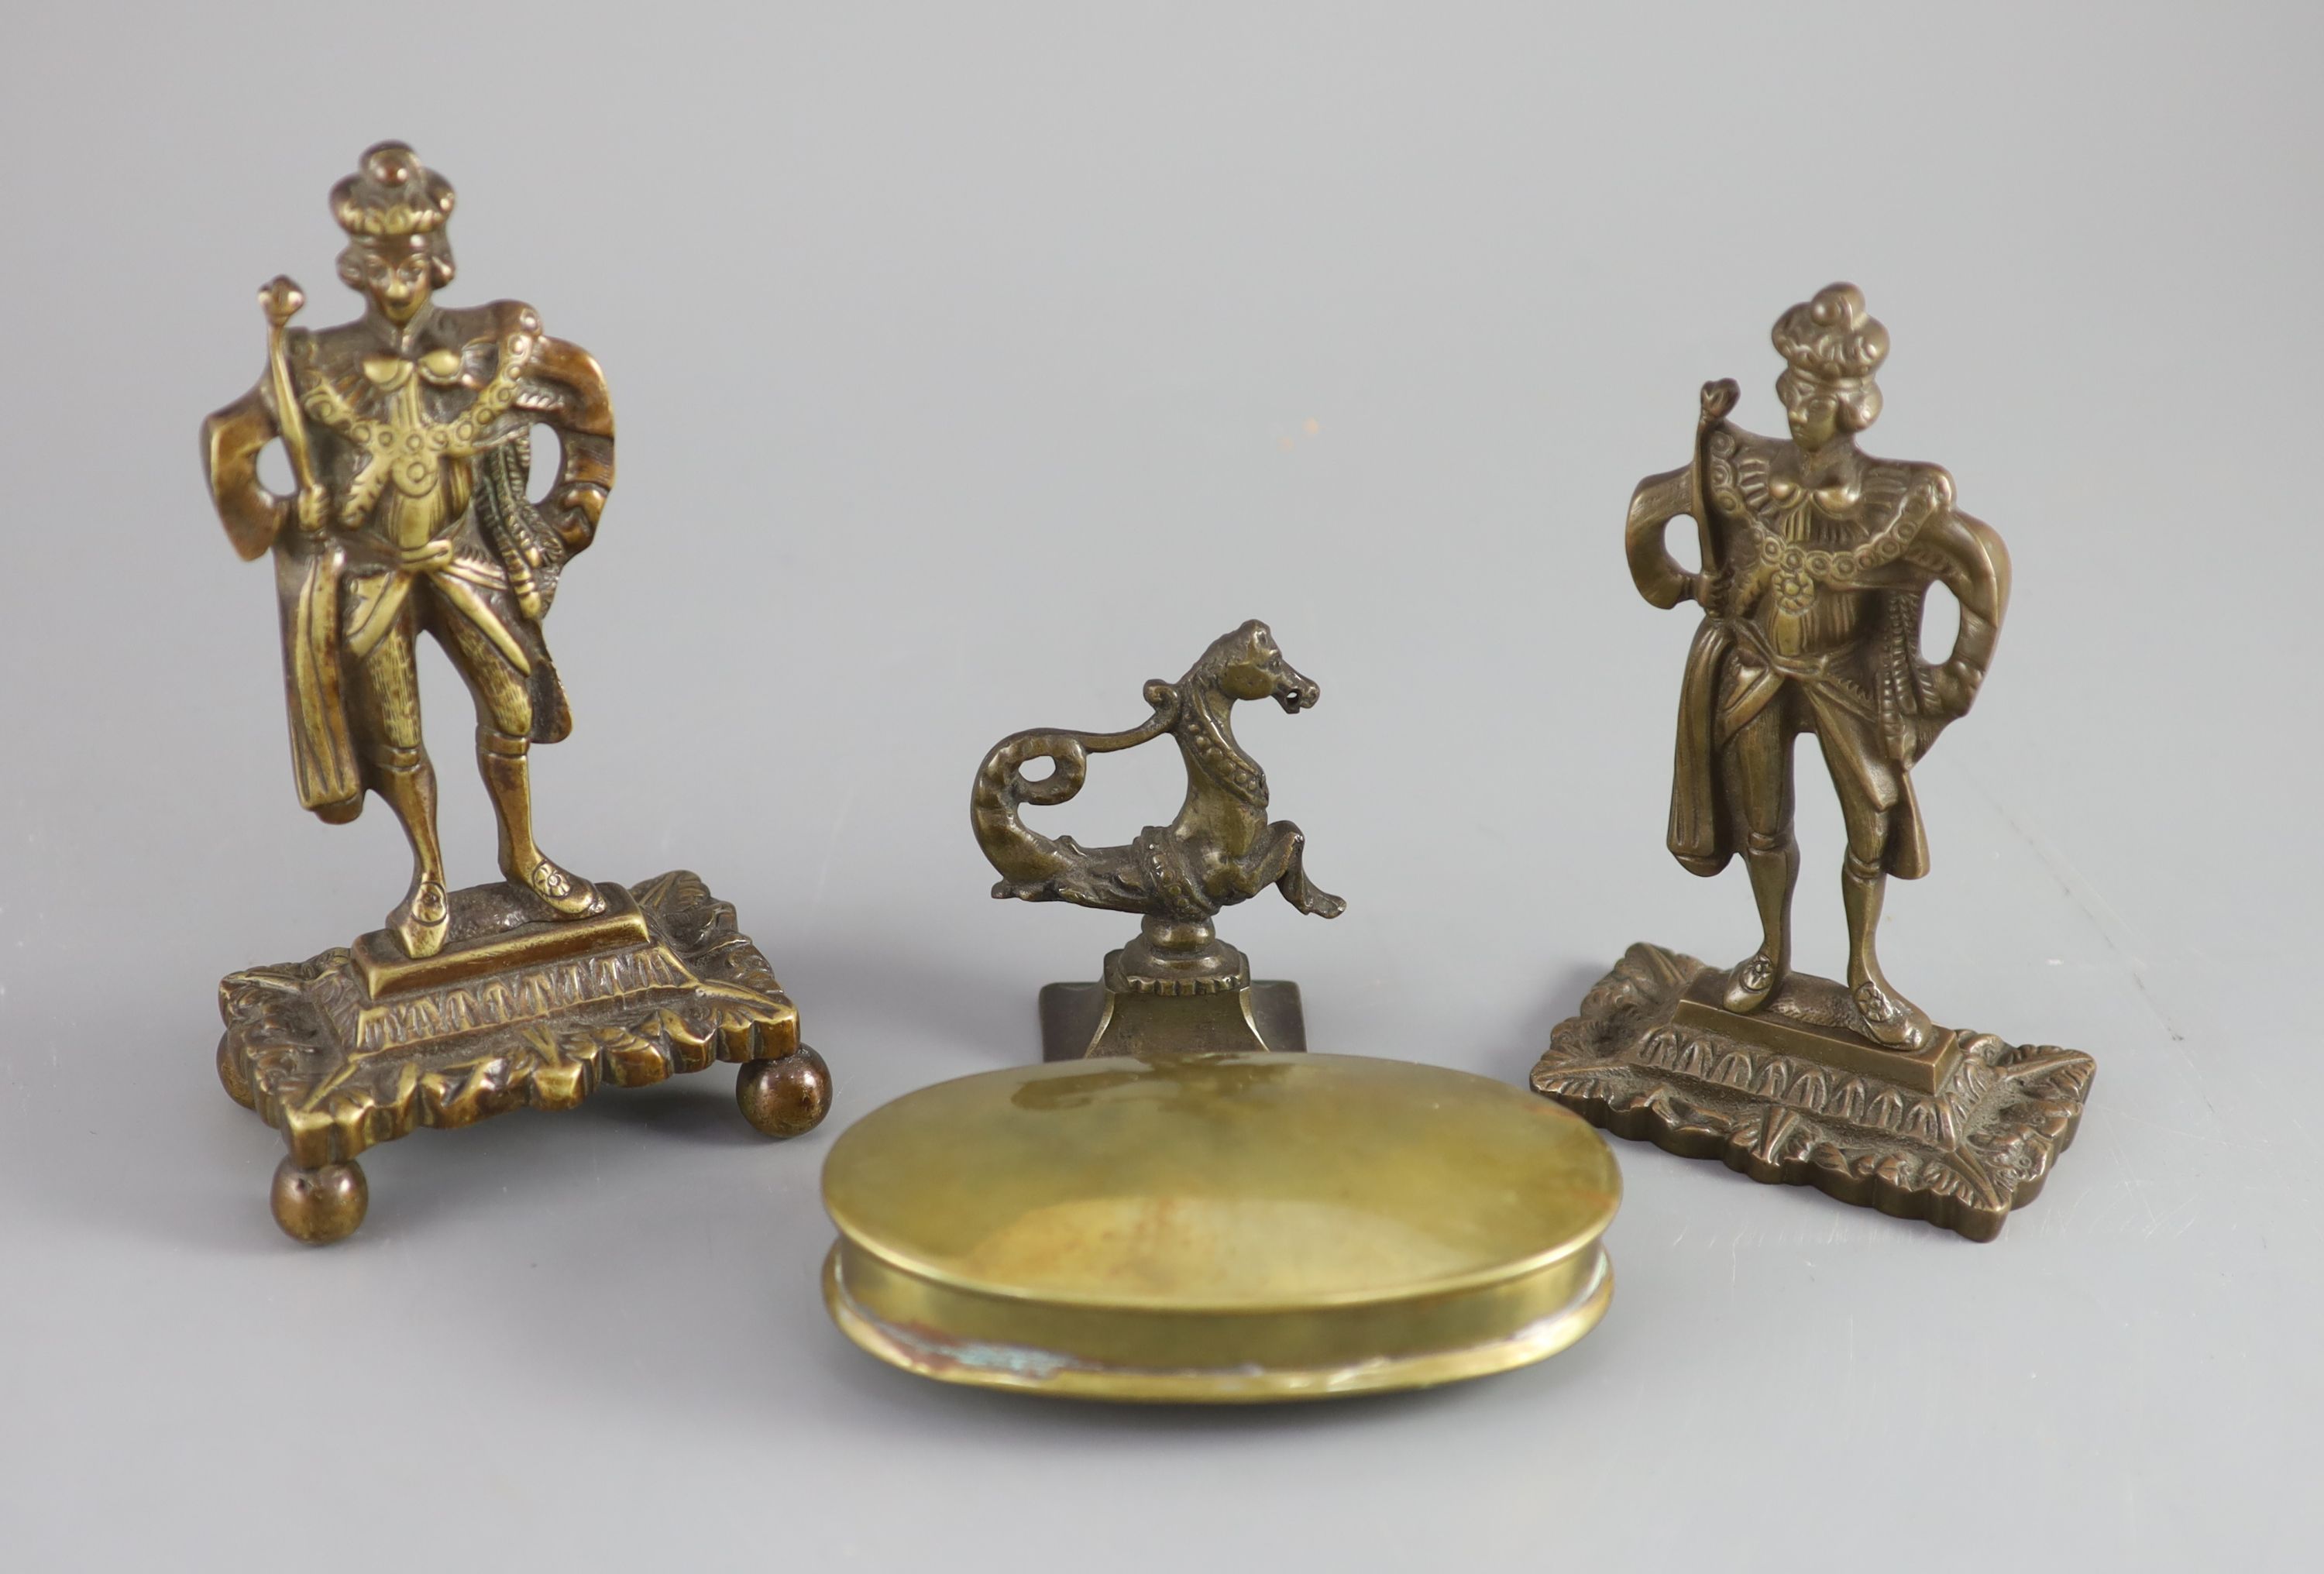 A near pair of William IV bronze figures of a monarch, a Venetian seahorse finial and a brass tobacco box.